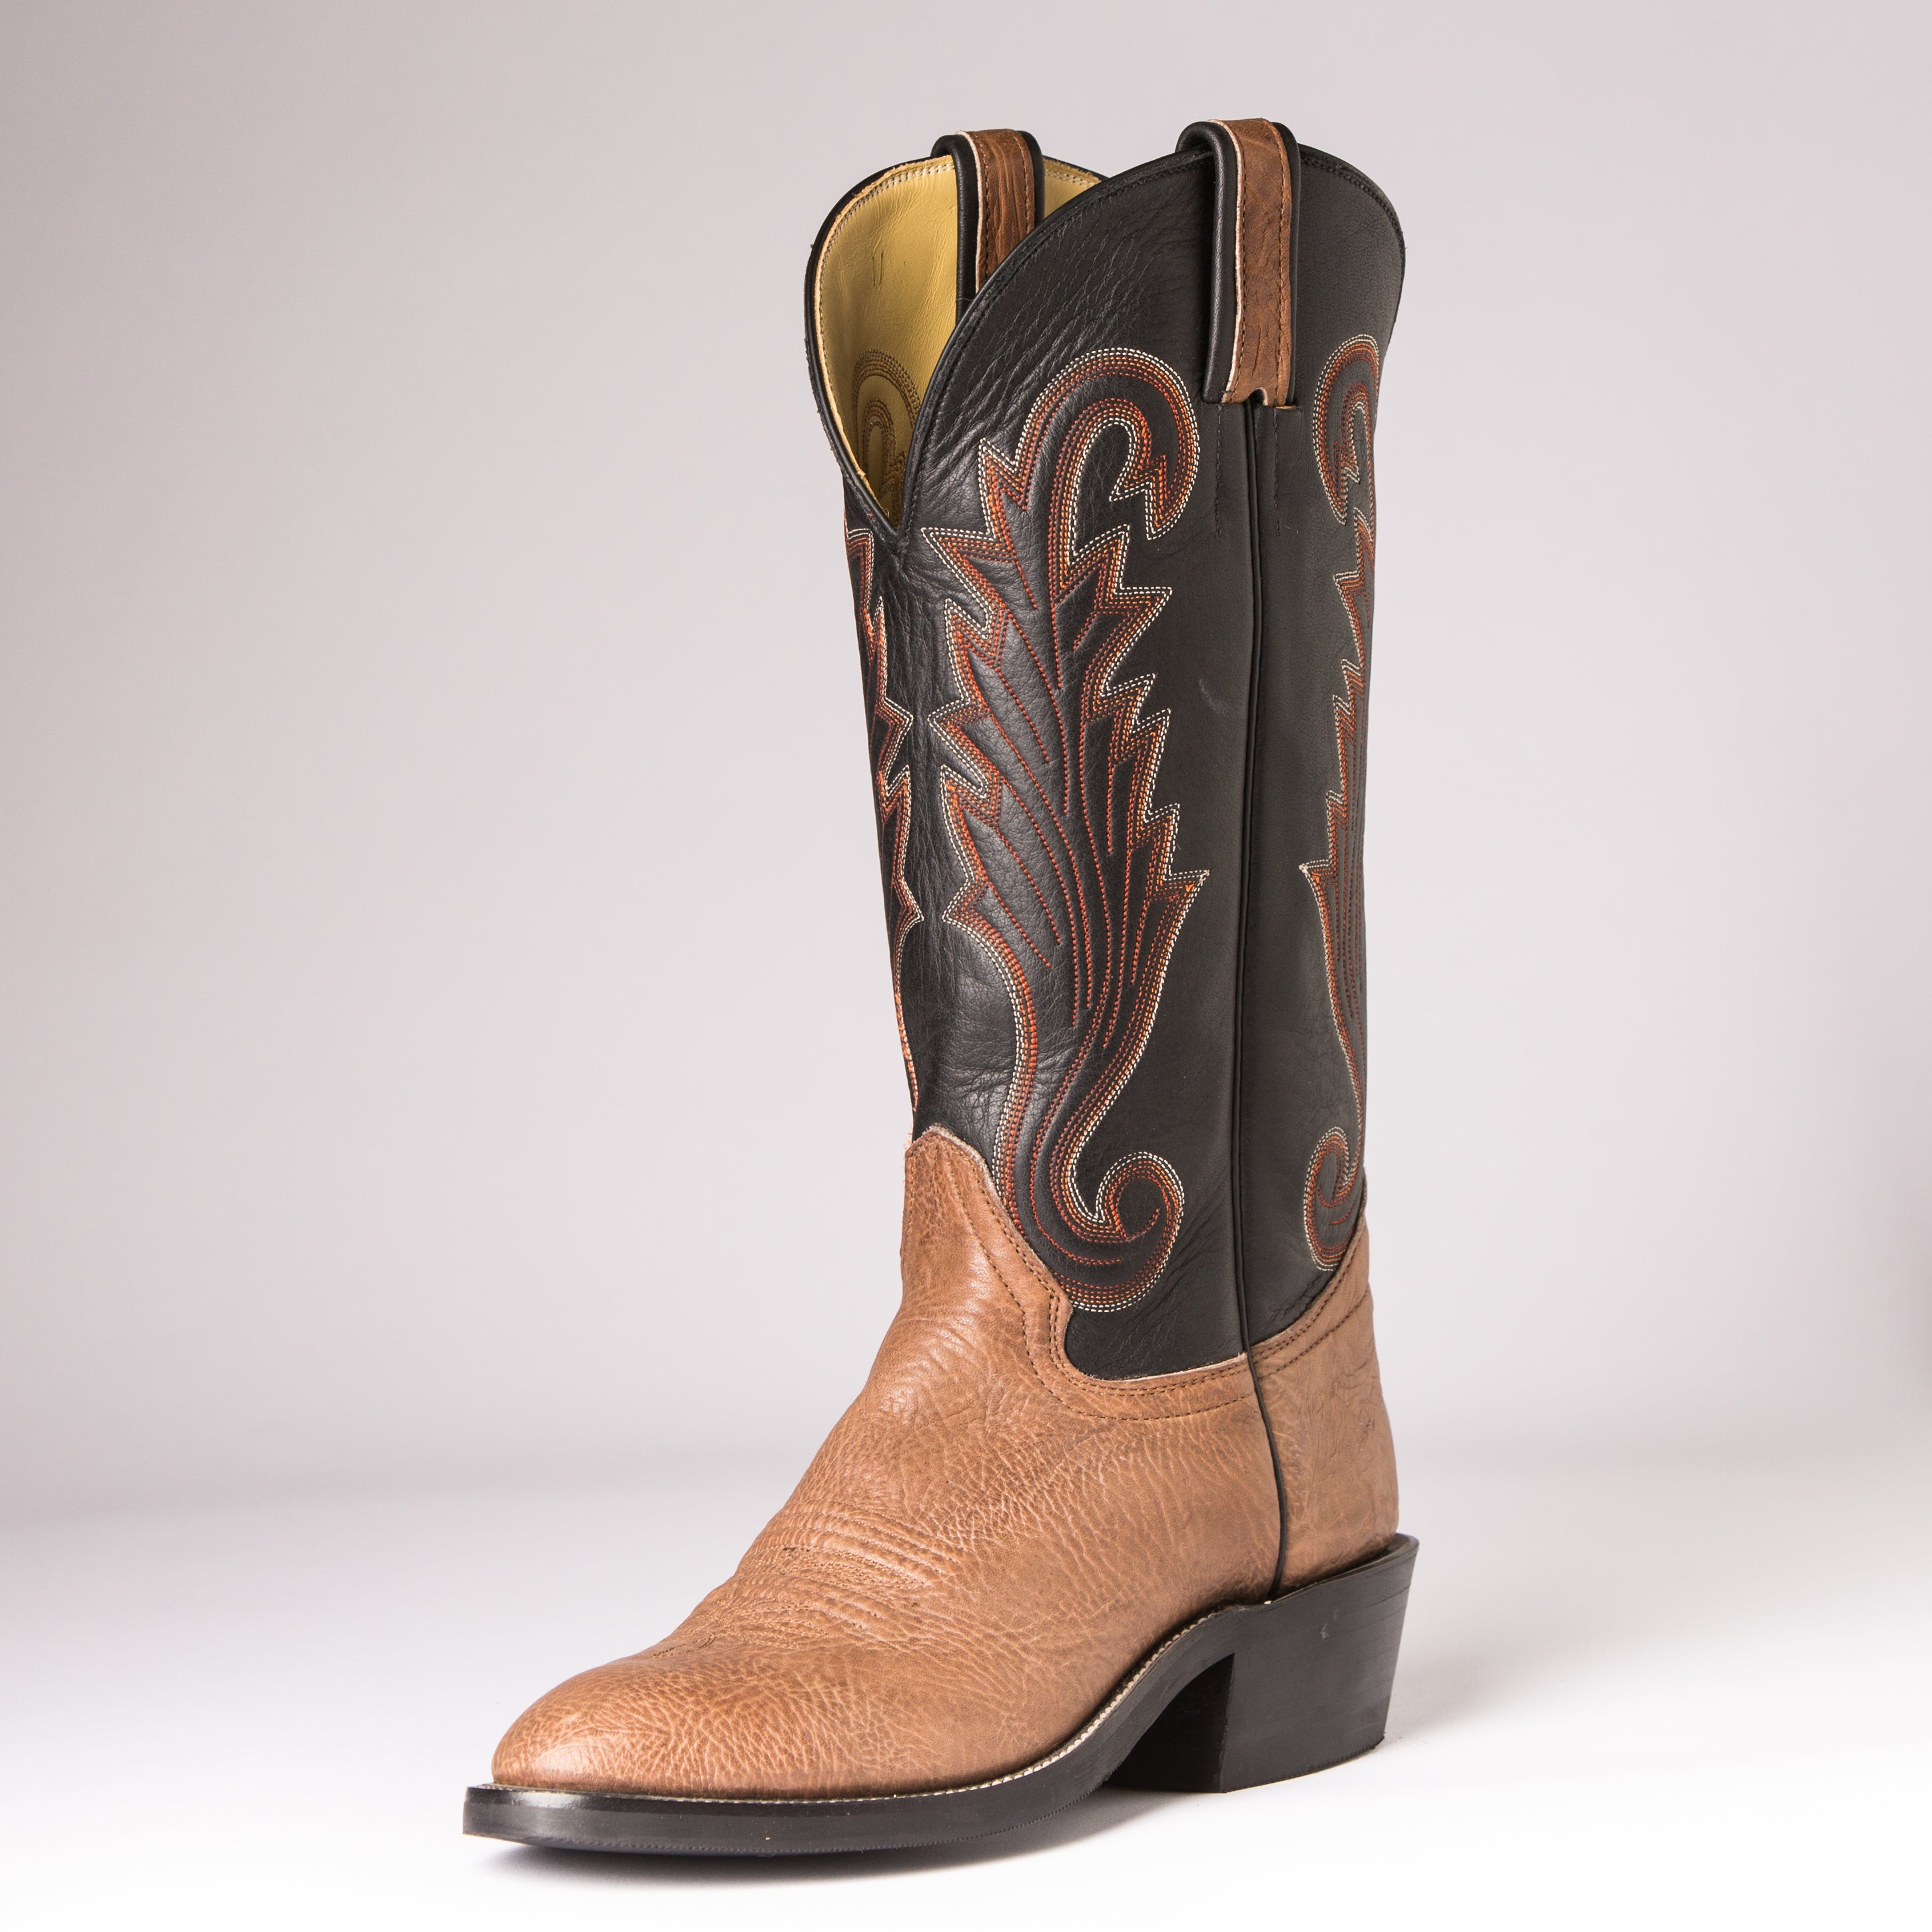 Men's Western Boots - Carter's Boots and Repair